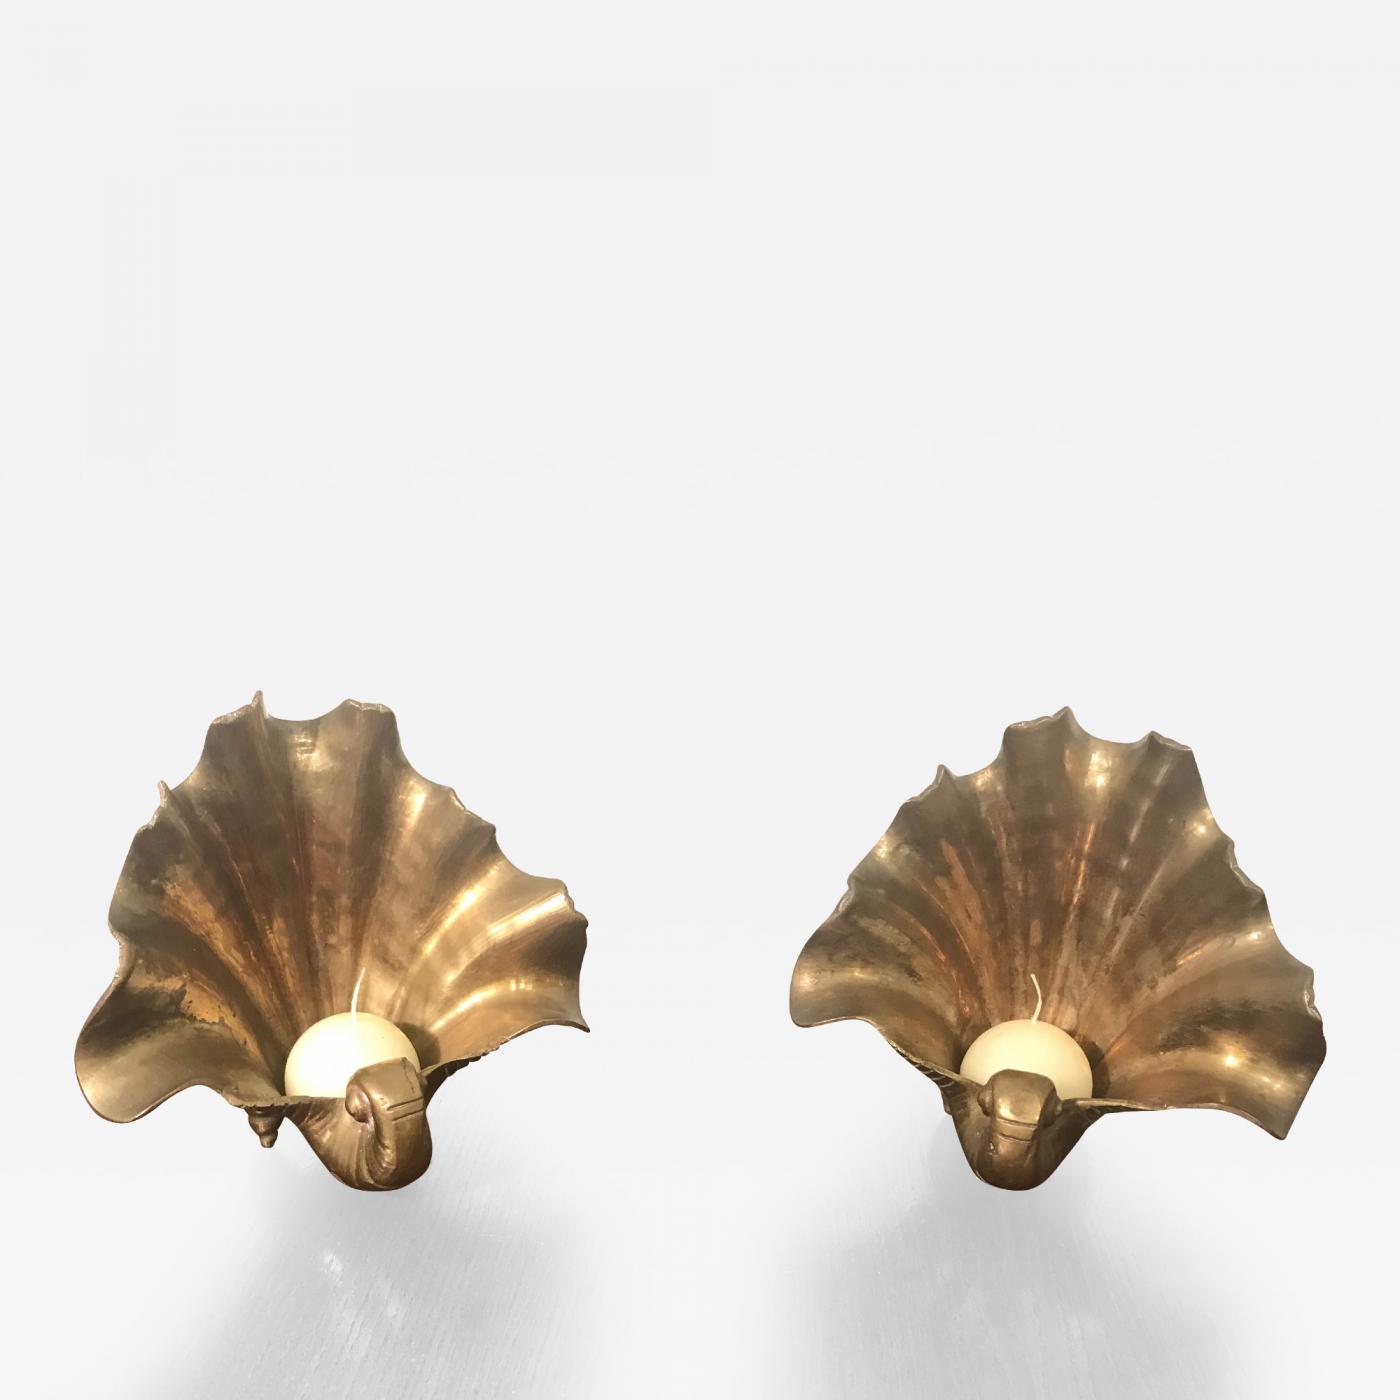 Brass Shell Form Candle Holders/Catchalls - a Pair